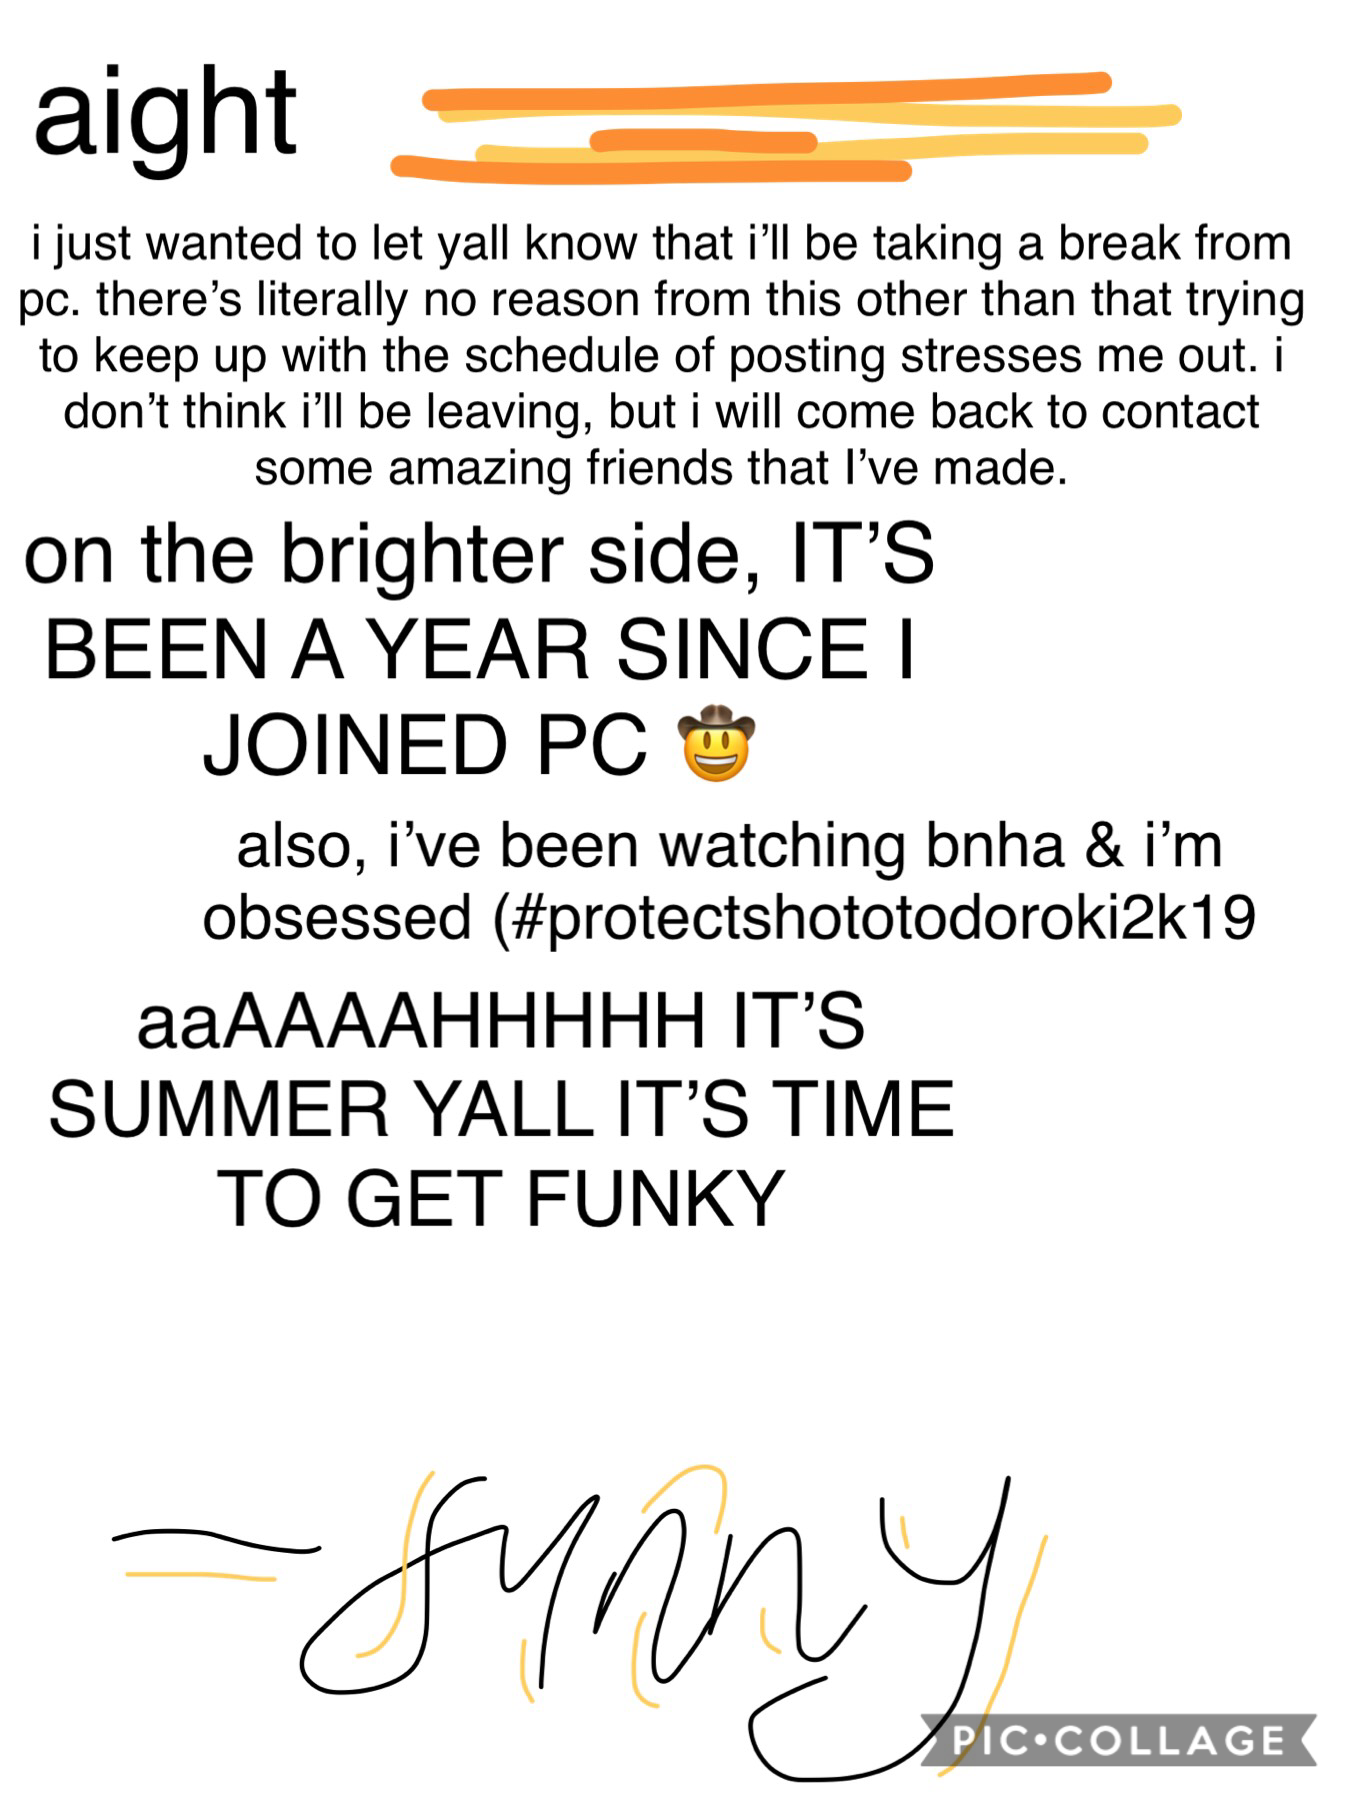 it’s summer yall
IT’S TIME TO GET FUNKY